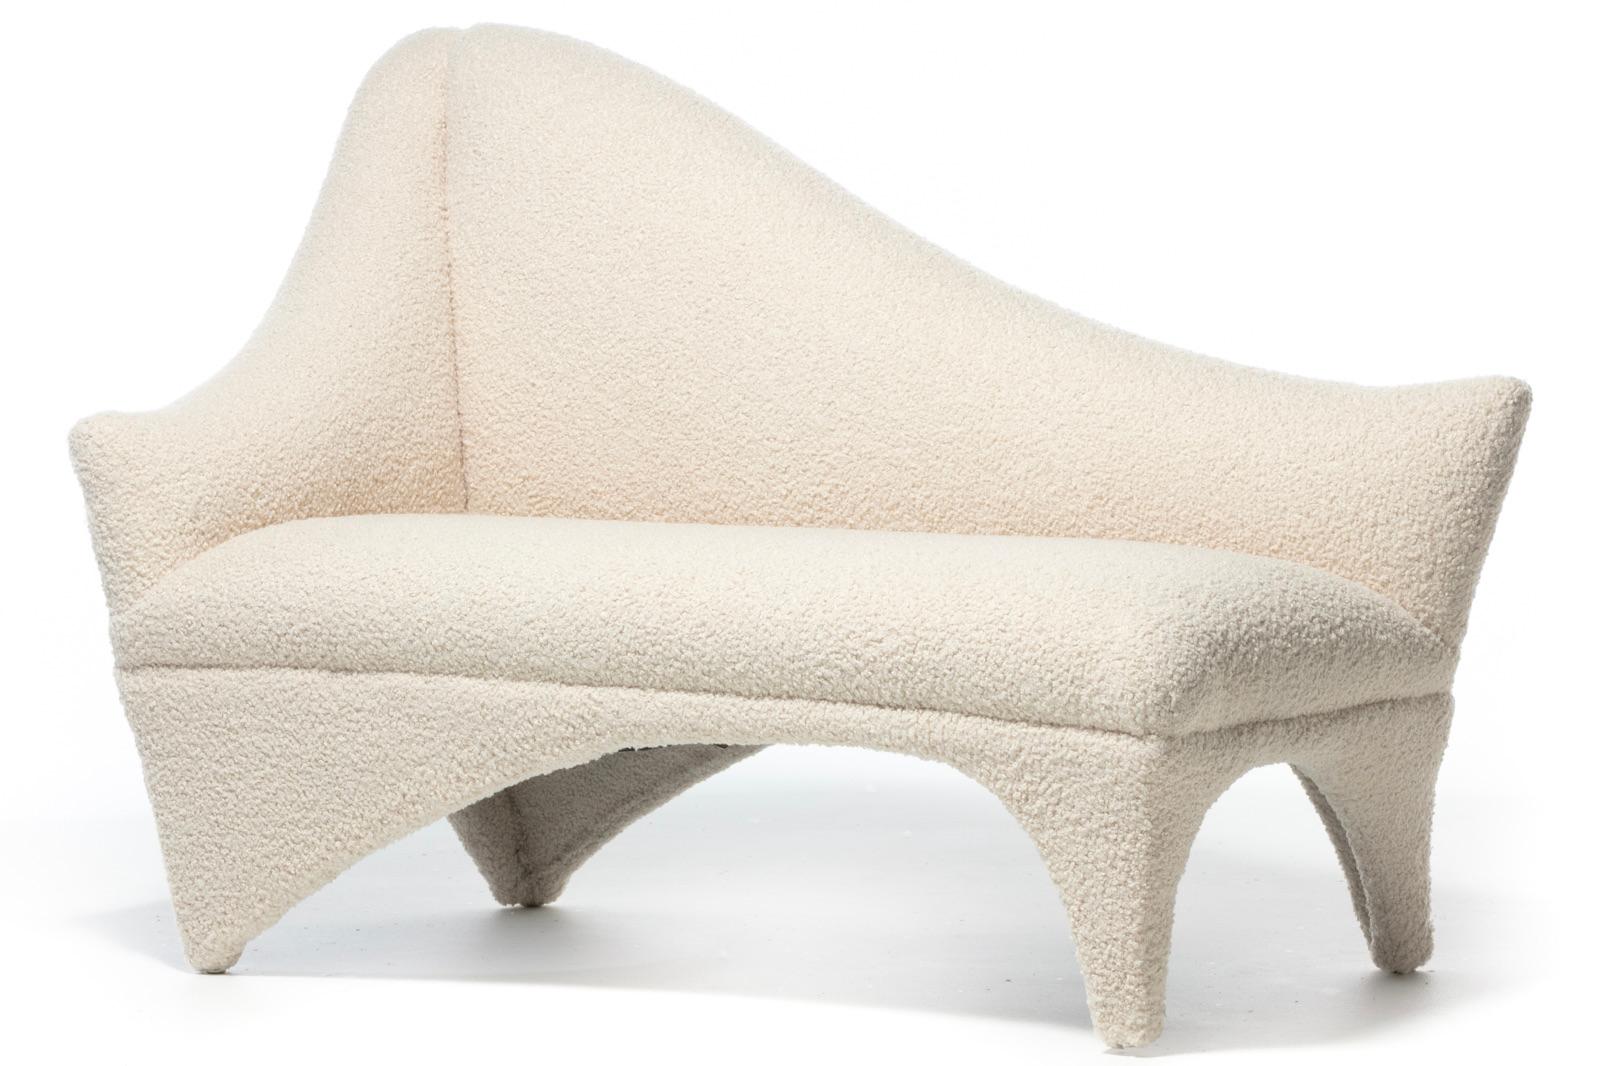 American Vladimir Kagan A-Symmetric Settee in Ivory Bouclé by Directional, c. 1991 For Sale